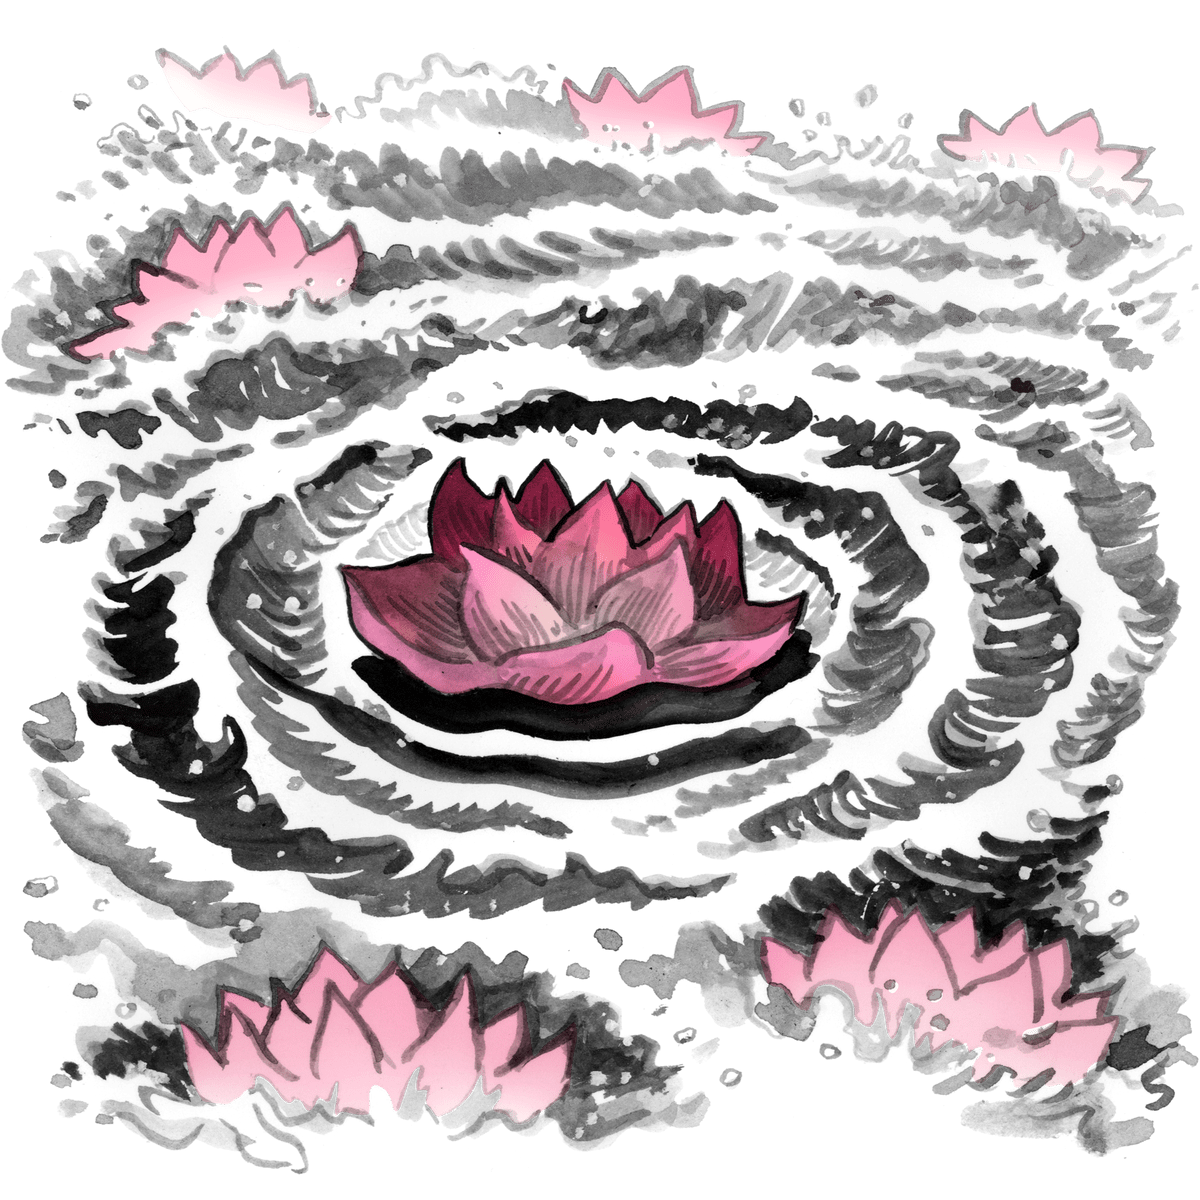 Illustration of pink lotus flowers in water. There are ripples in the water.